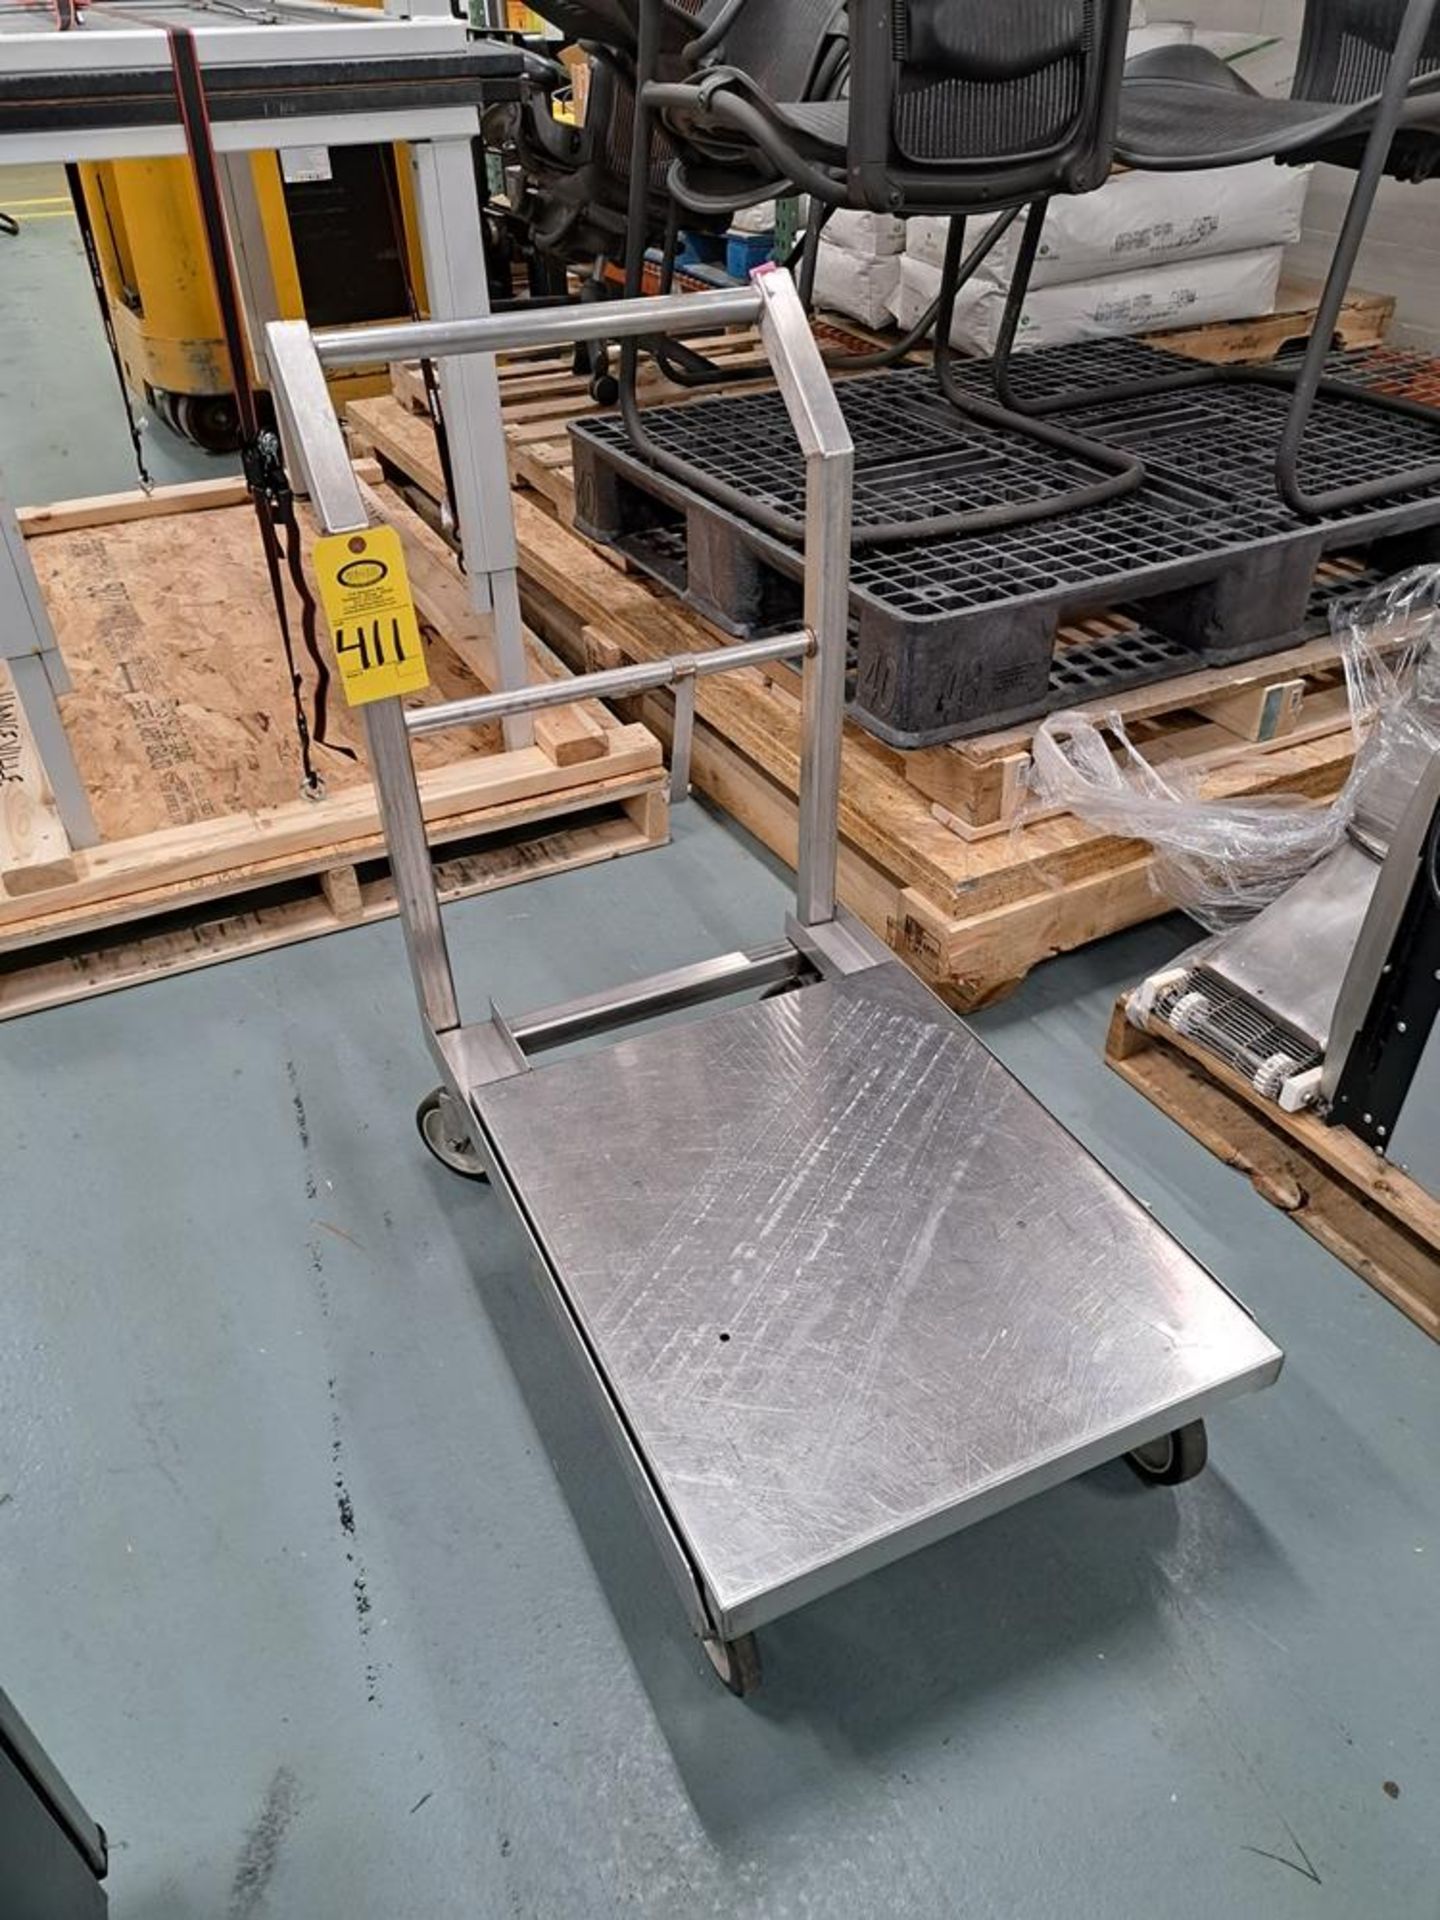 Stainless Steel Cart, 21" W X 24" L platform-Removal Is By Appointment Only-All Small Hand Carry